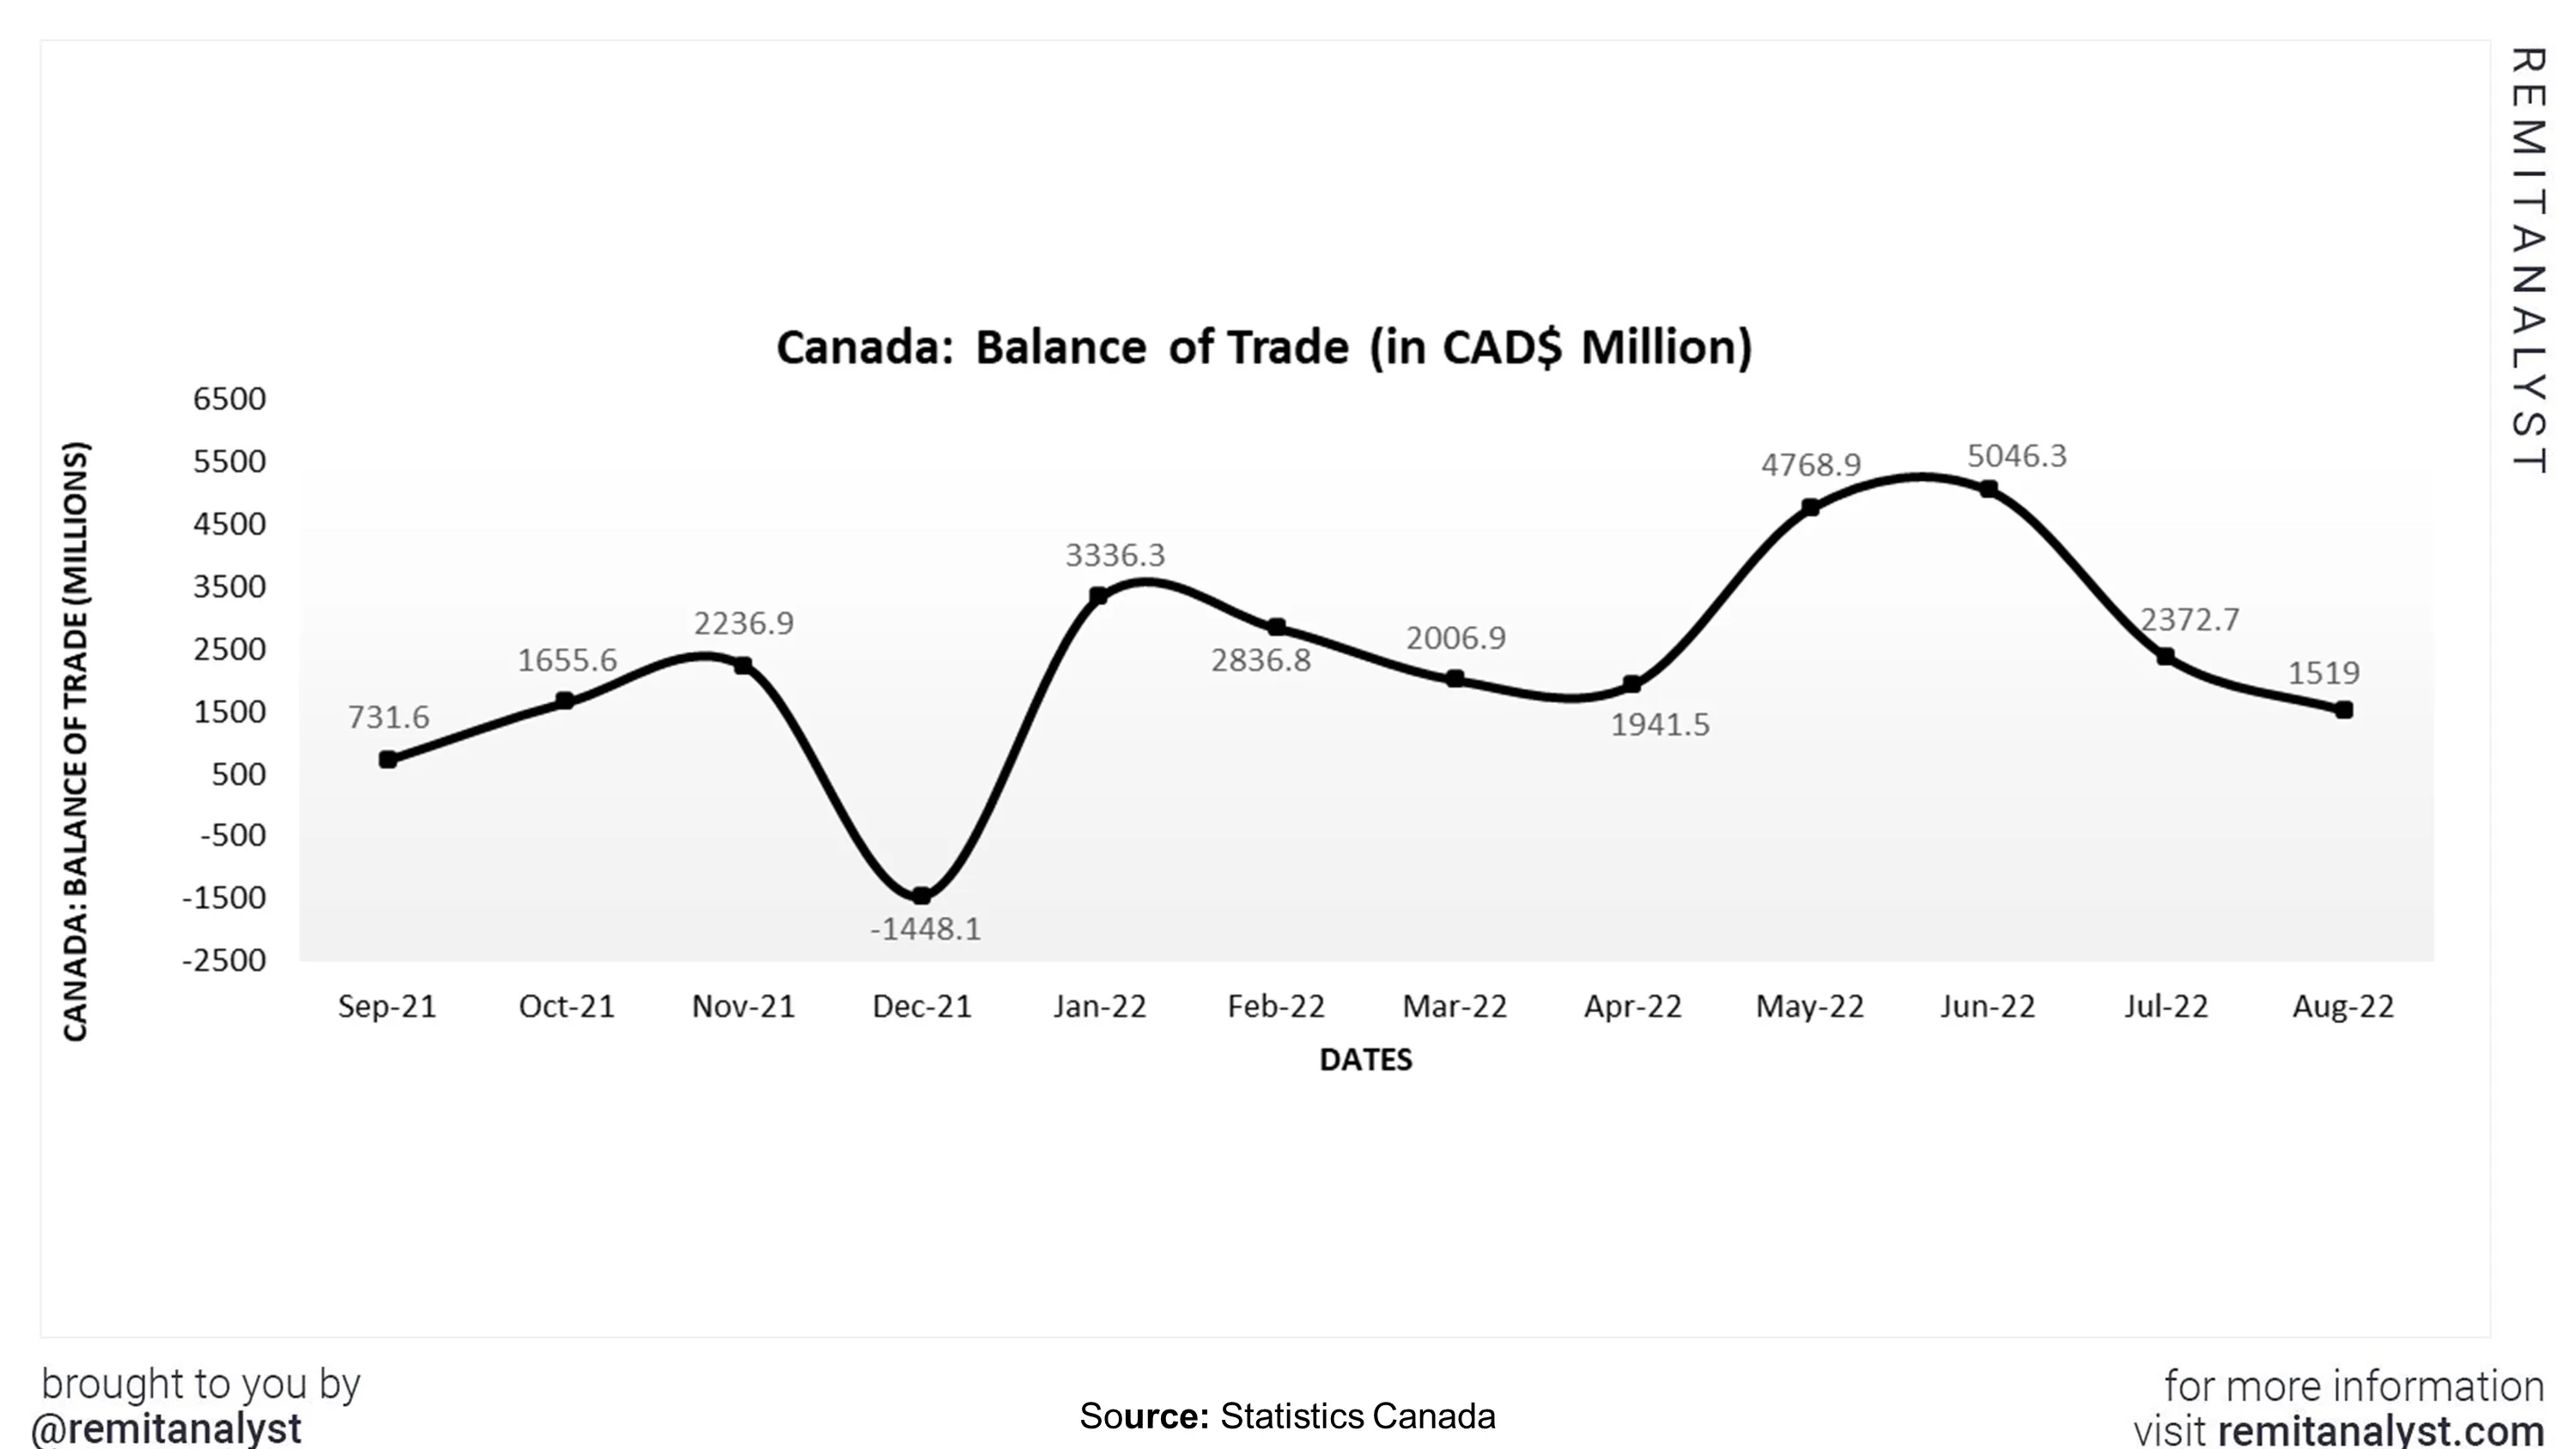 balance-of-trade-canada-from-sep-2021-to-aug-2022